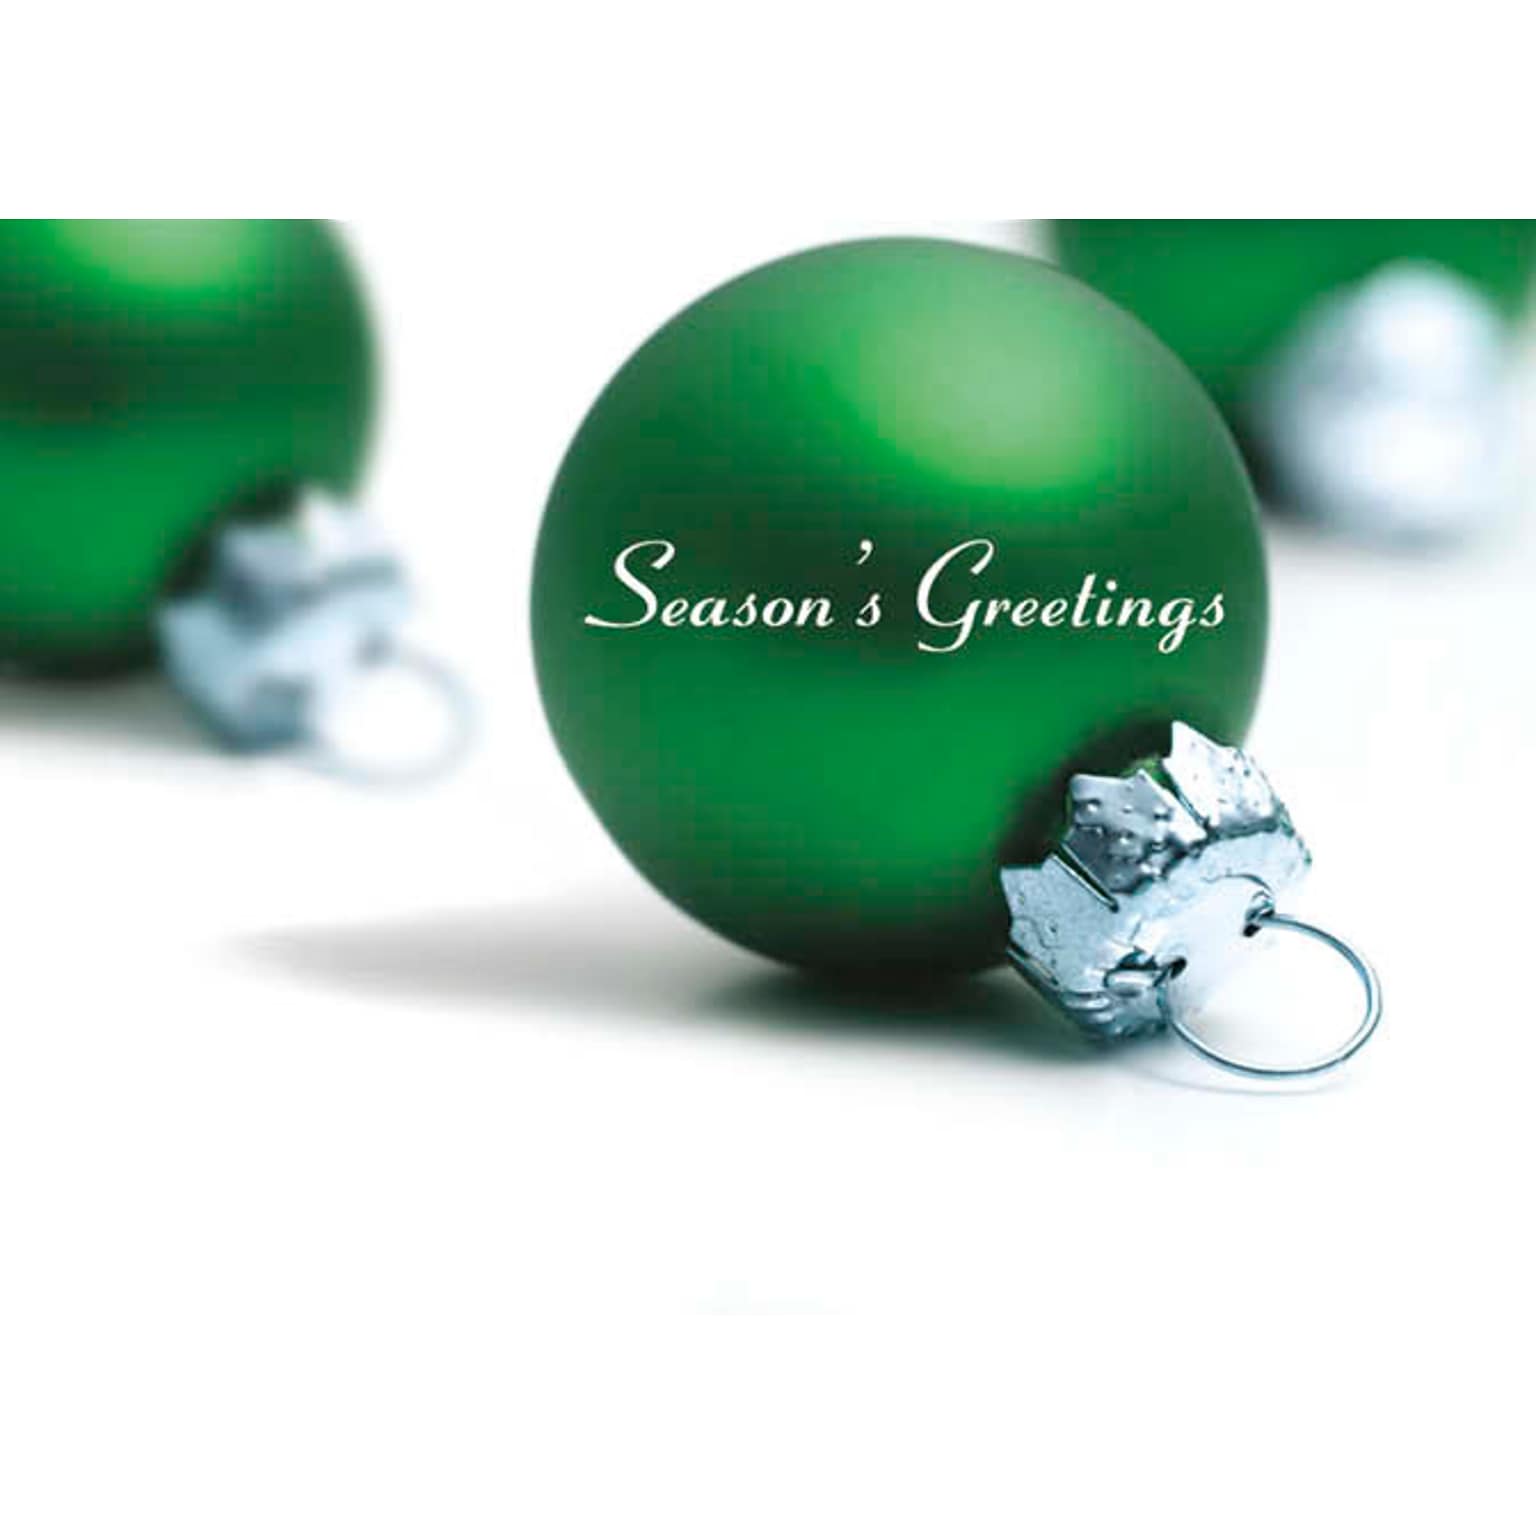 Seasons Greetings Green Ornament Holiday Greeting Cards, With A7 Envelopes, 7 x 5, 25 Cards per Set